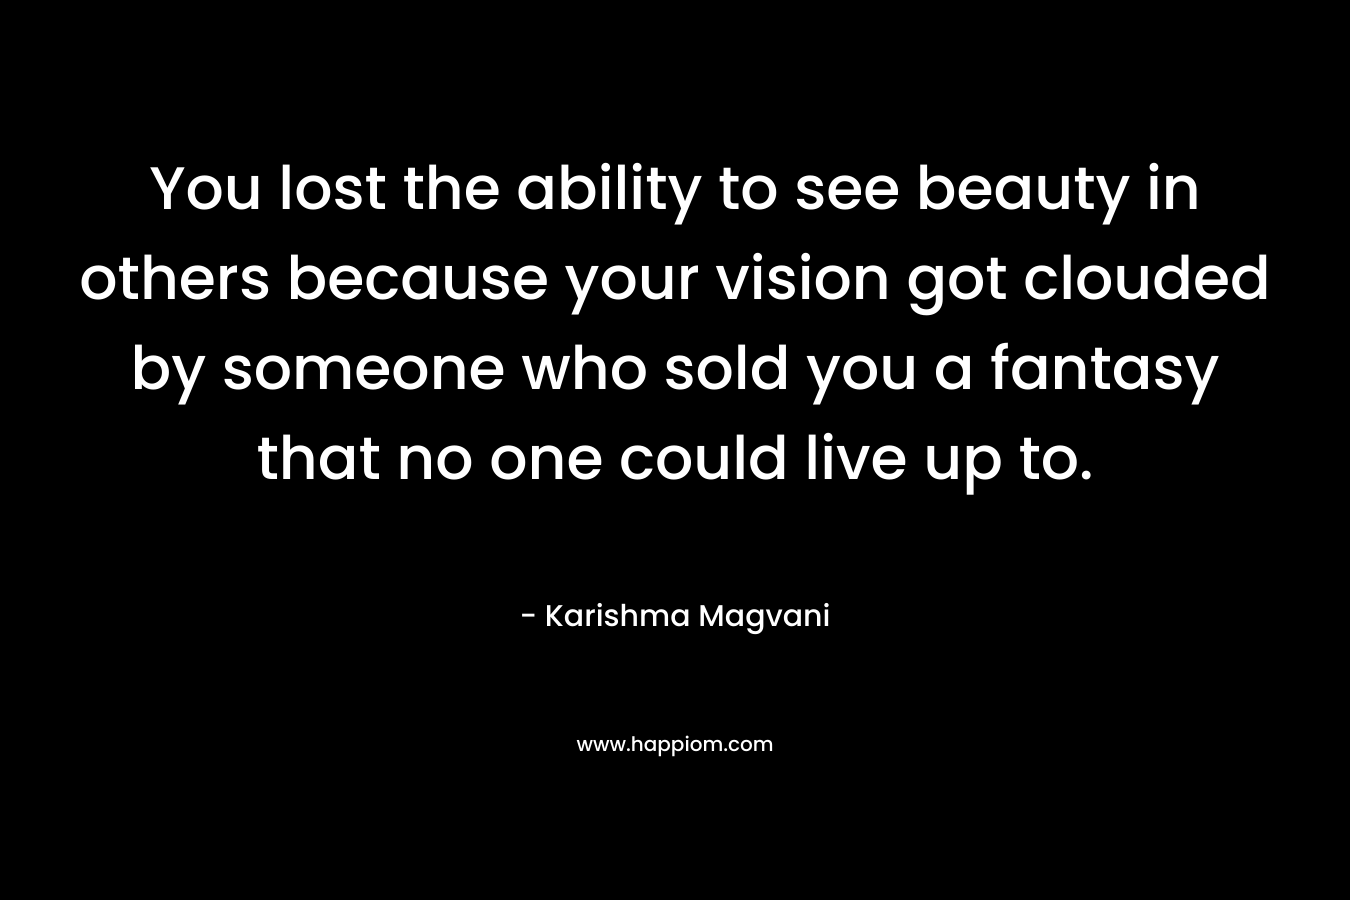 You lost the ability to see beauty in others because your vision got clouded by someone who sold you a fantasy that no one could live up to.